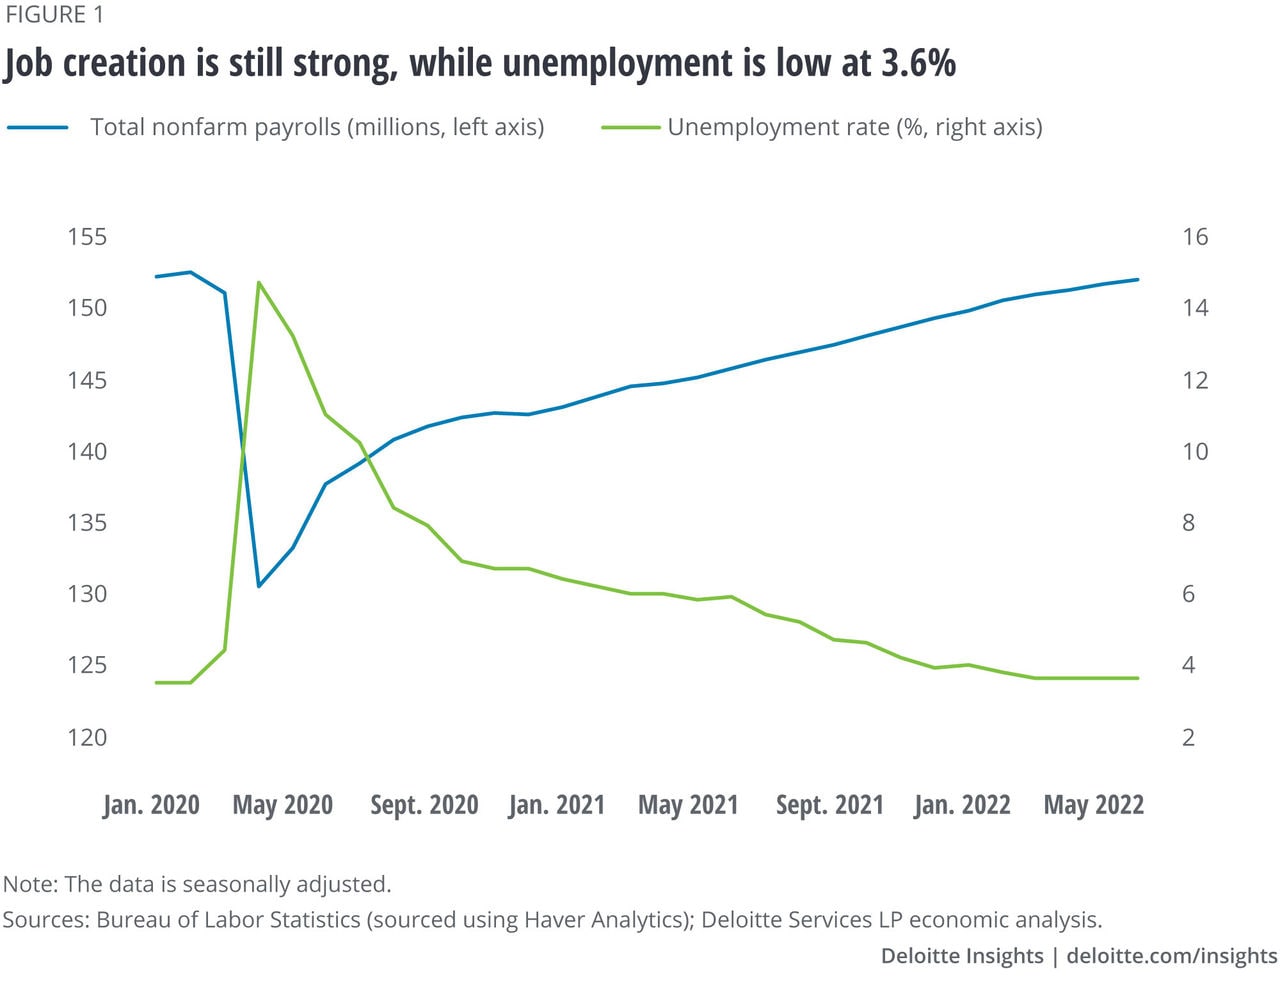 Figure 1. Job creation is still strong while unemployment is low at 3.6%